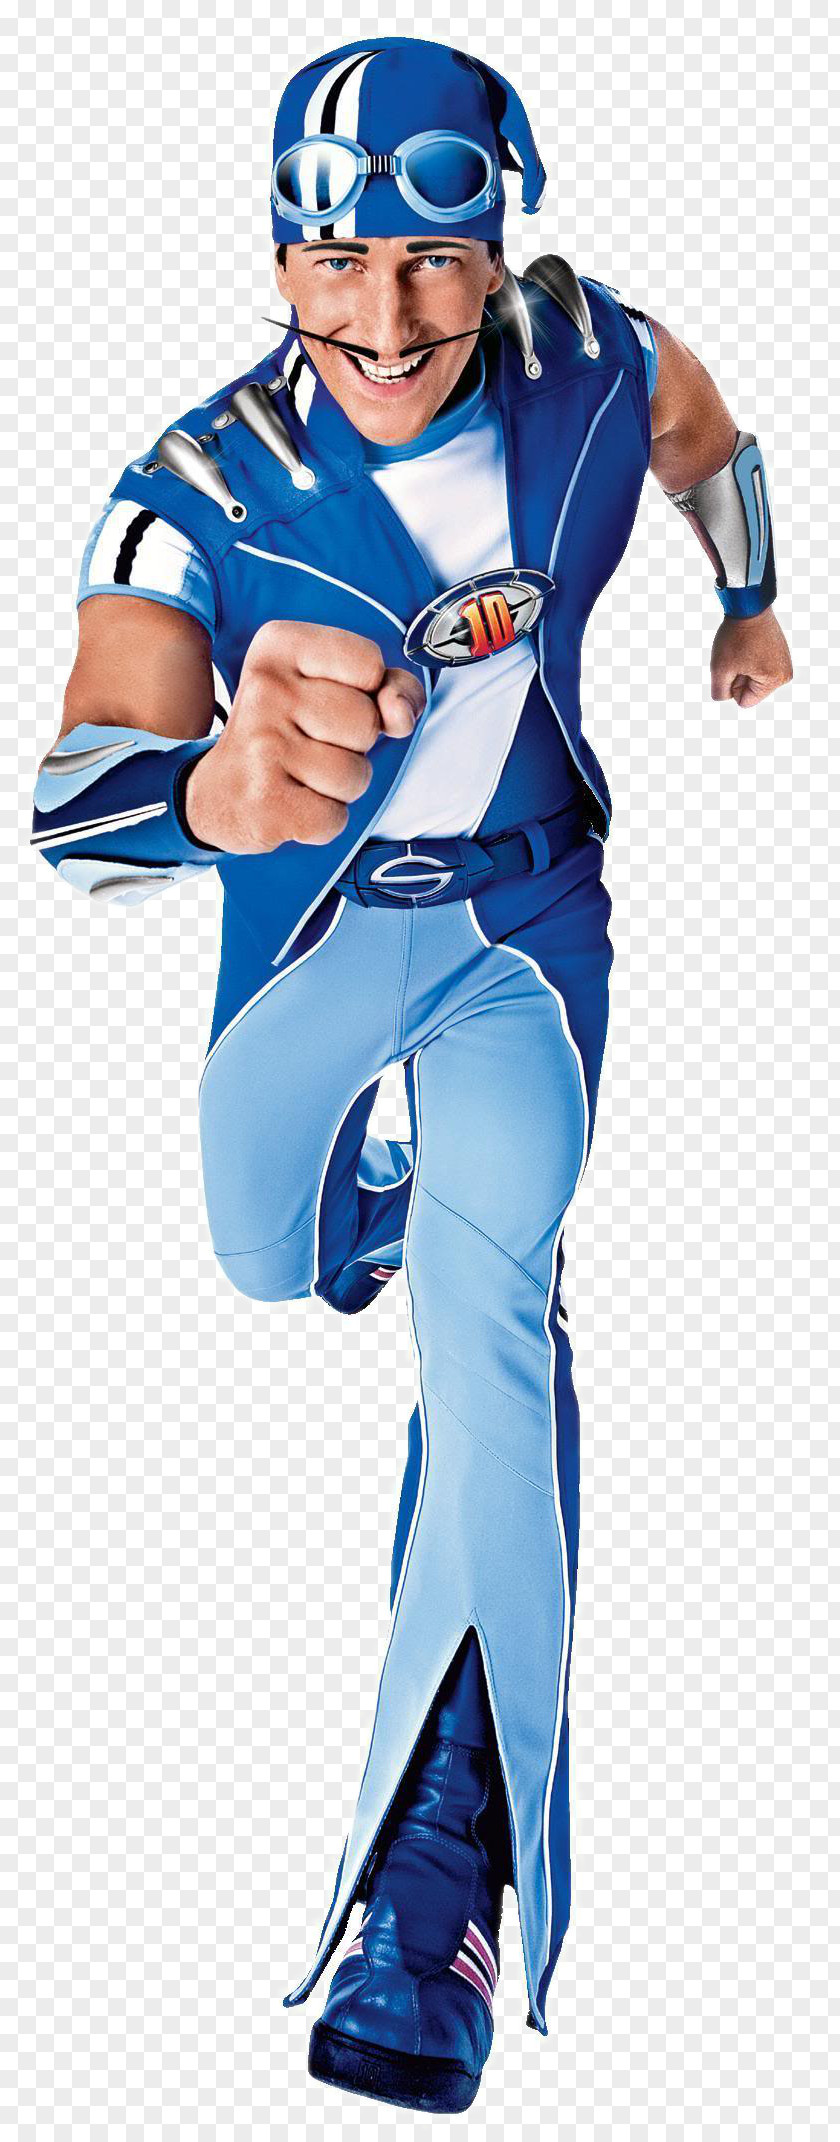 Gladiator Sportacus LazyTown Stephanie Television Show Character PNG